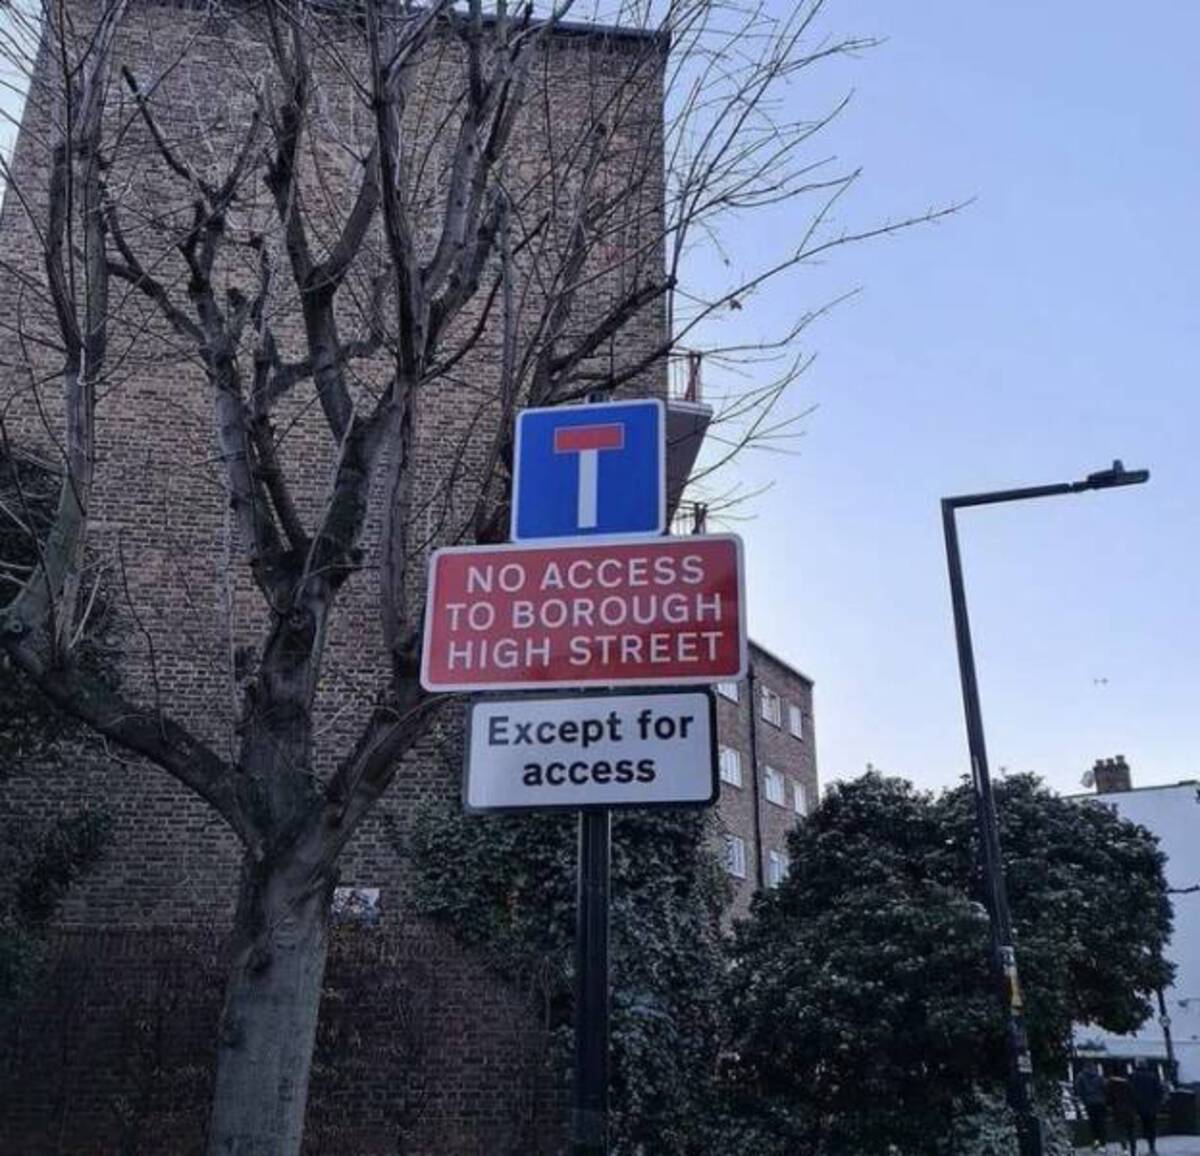 street sign - No Access To Borough High Street Except for access